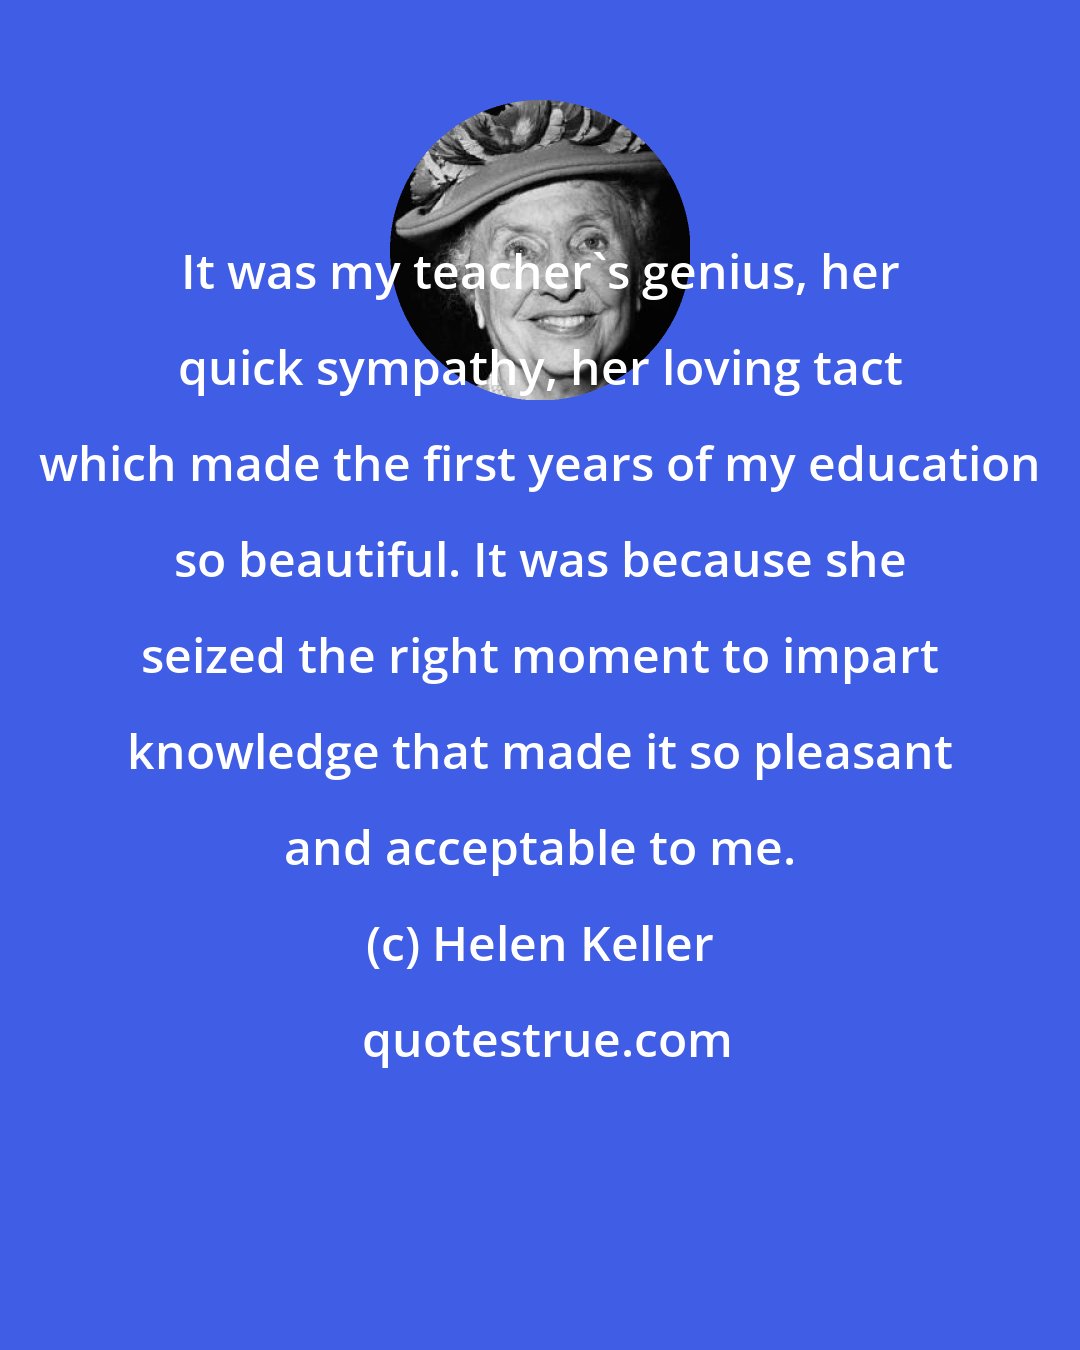 Helen Keller: It was my teacher's genius, her quick sympathy, her loving tact which made the first years of my education so beautiful. It was because she seized the right moment to impart knowledge that made it so pleasant and acceptable to me.